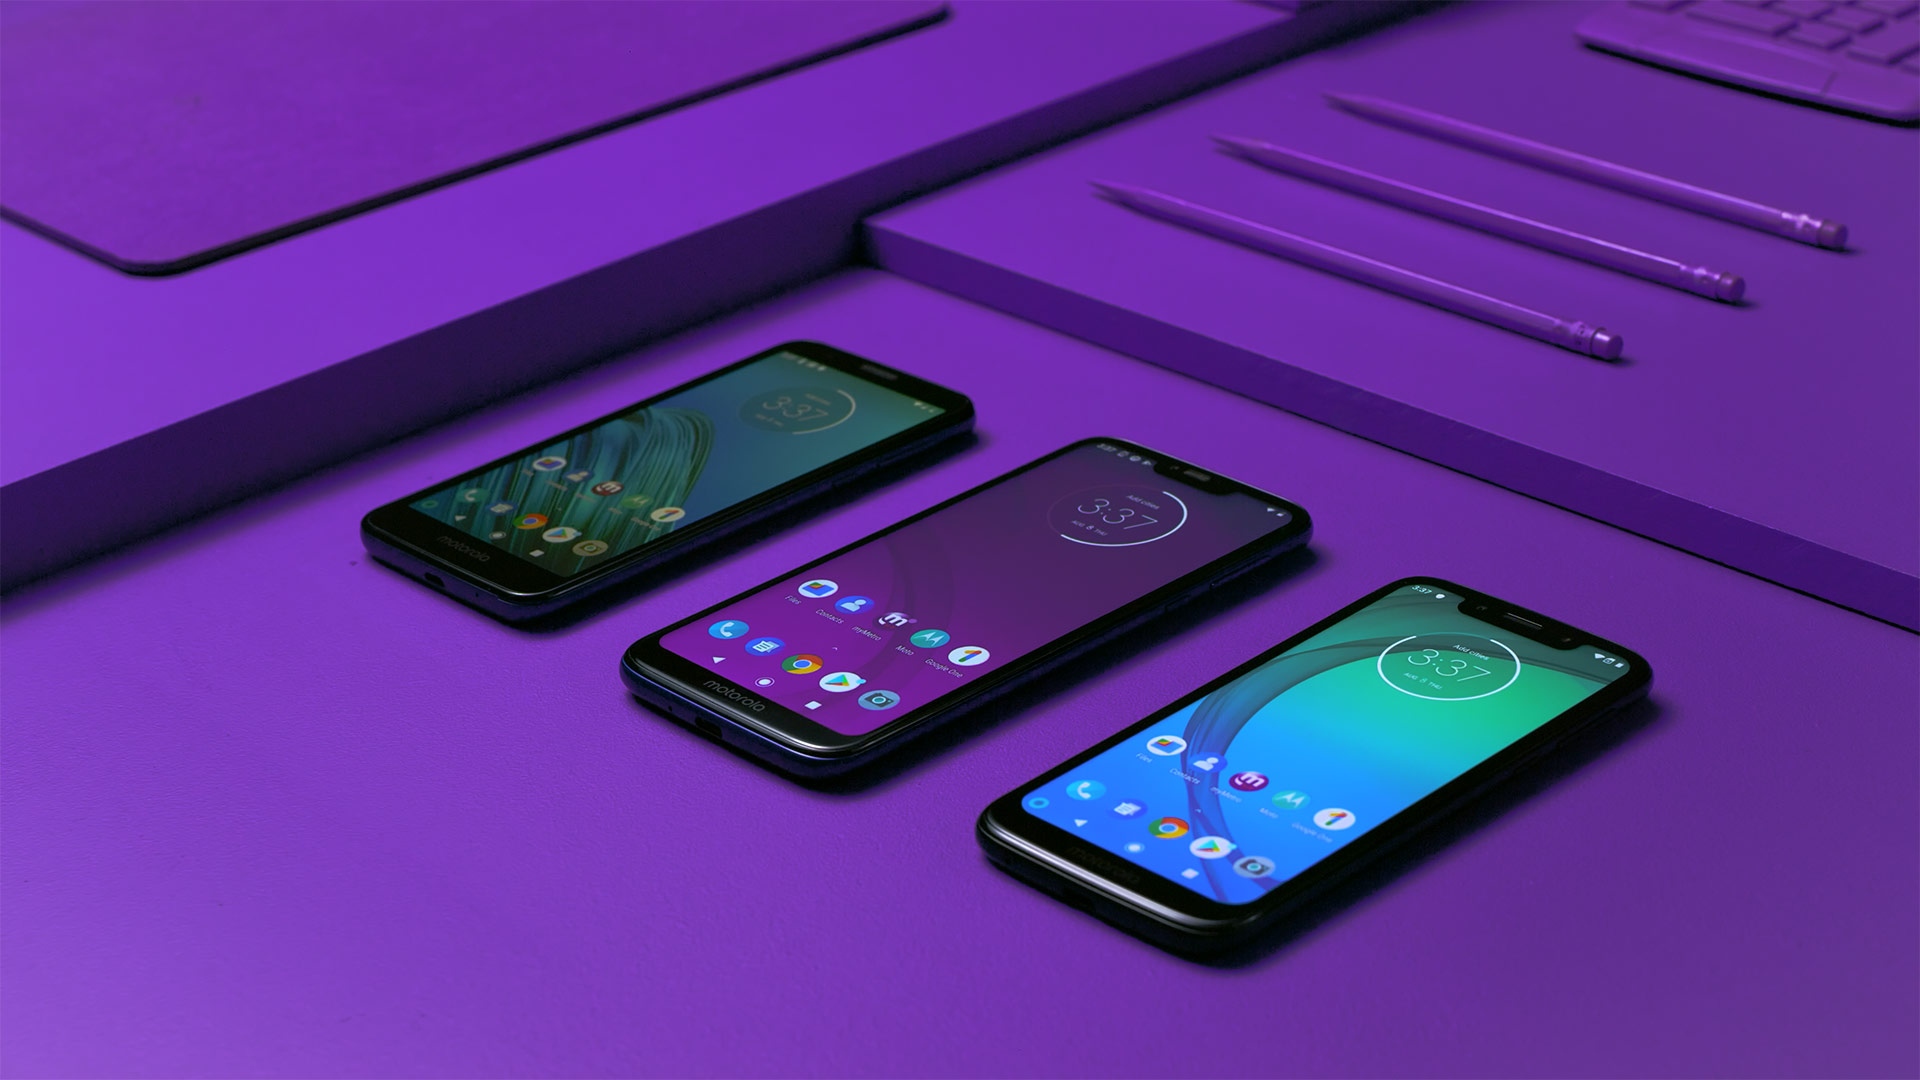 A n art directed shot of smartphones on a bright purple background.